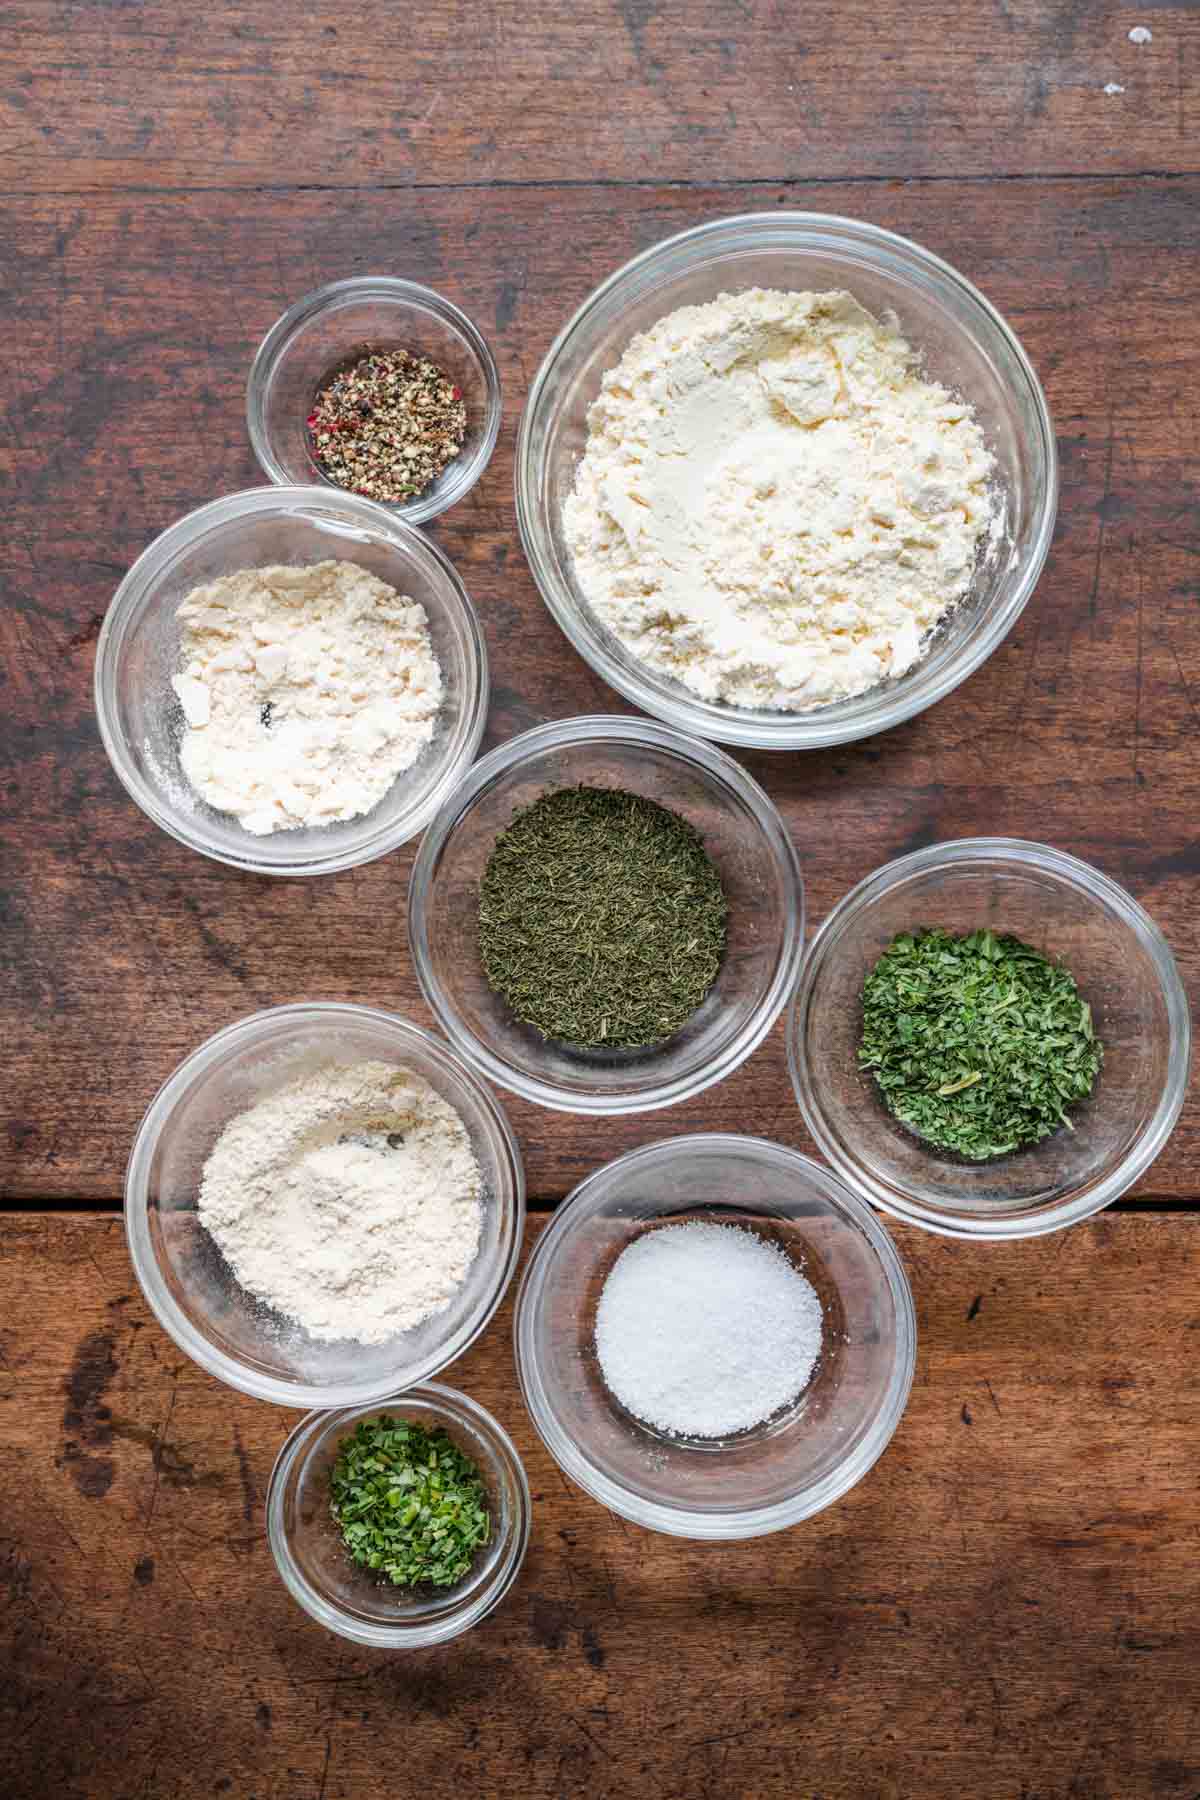 Dry Buttermilk Ranch Mix ingredients in separate bowls before mixing